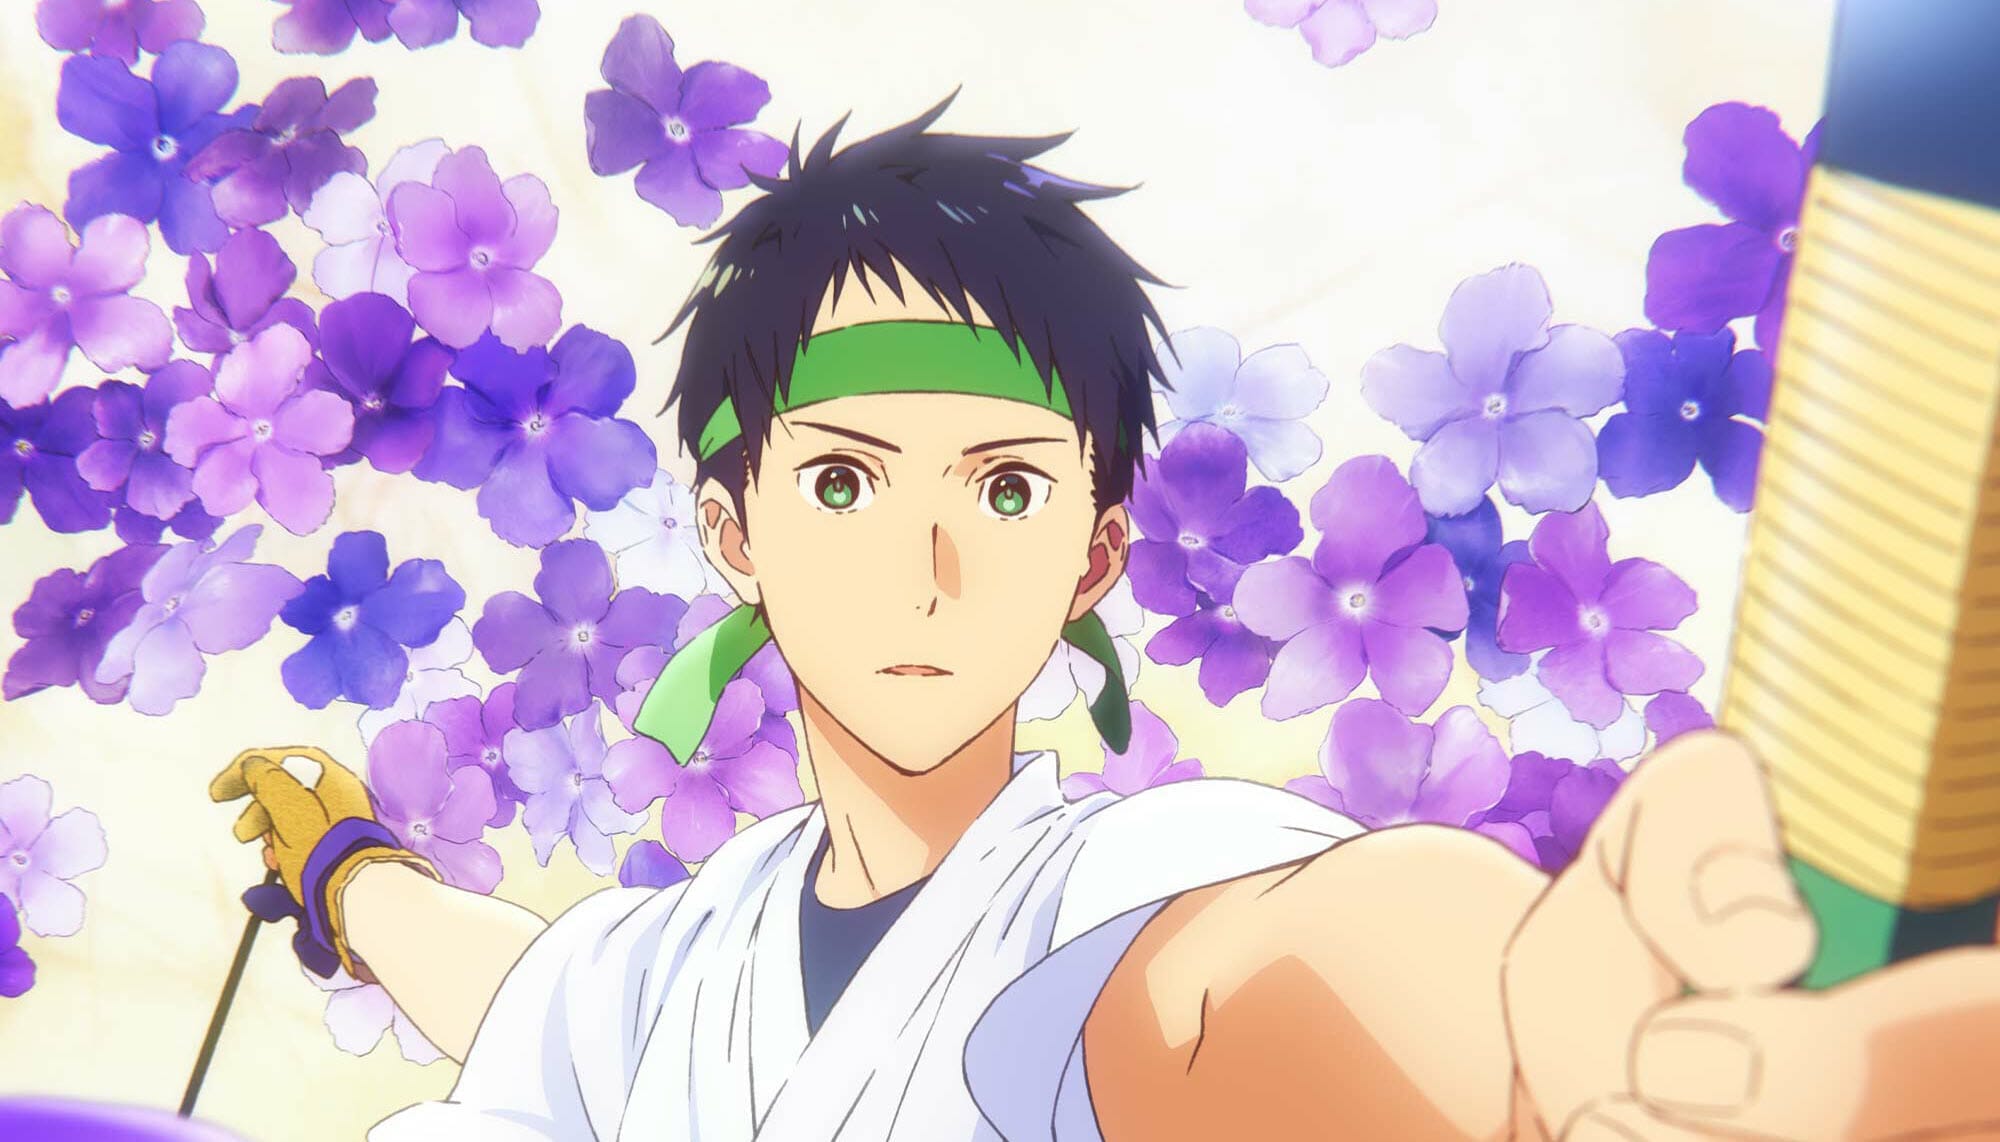 Official Trailer - Tsurune The Movie : The First Shot 